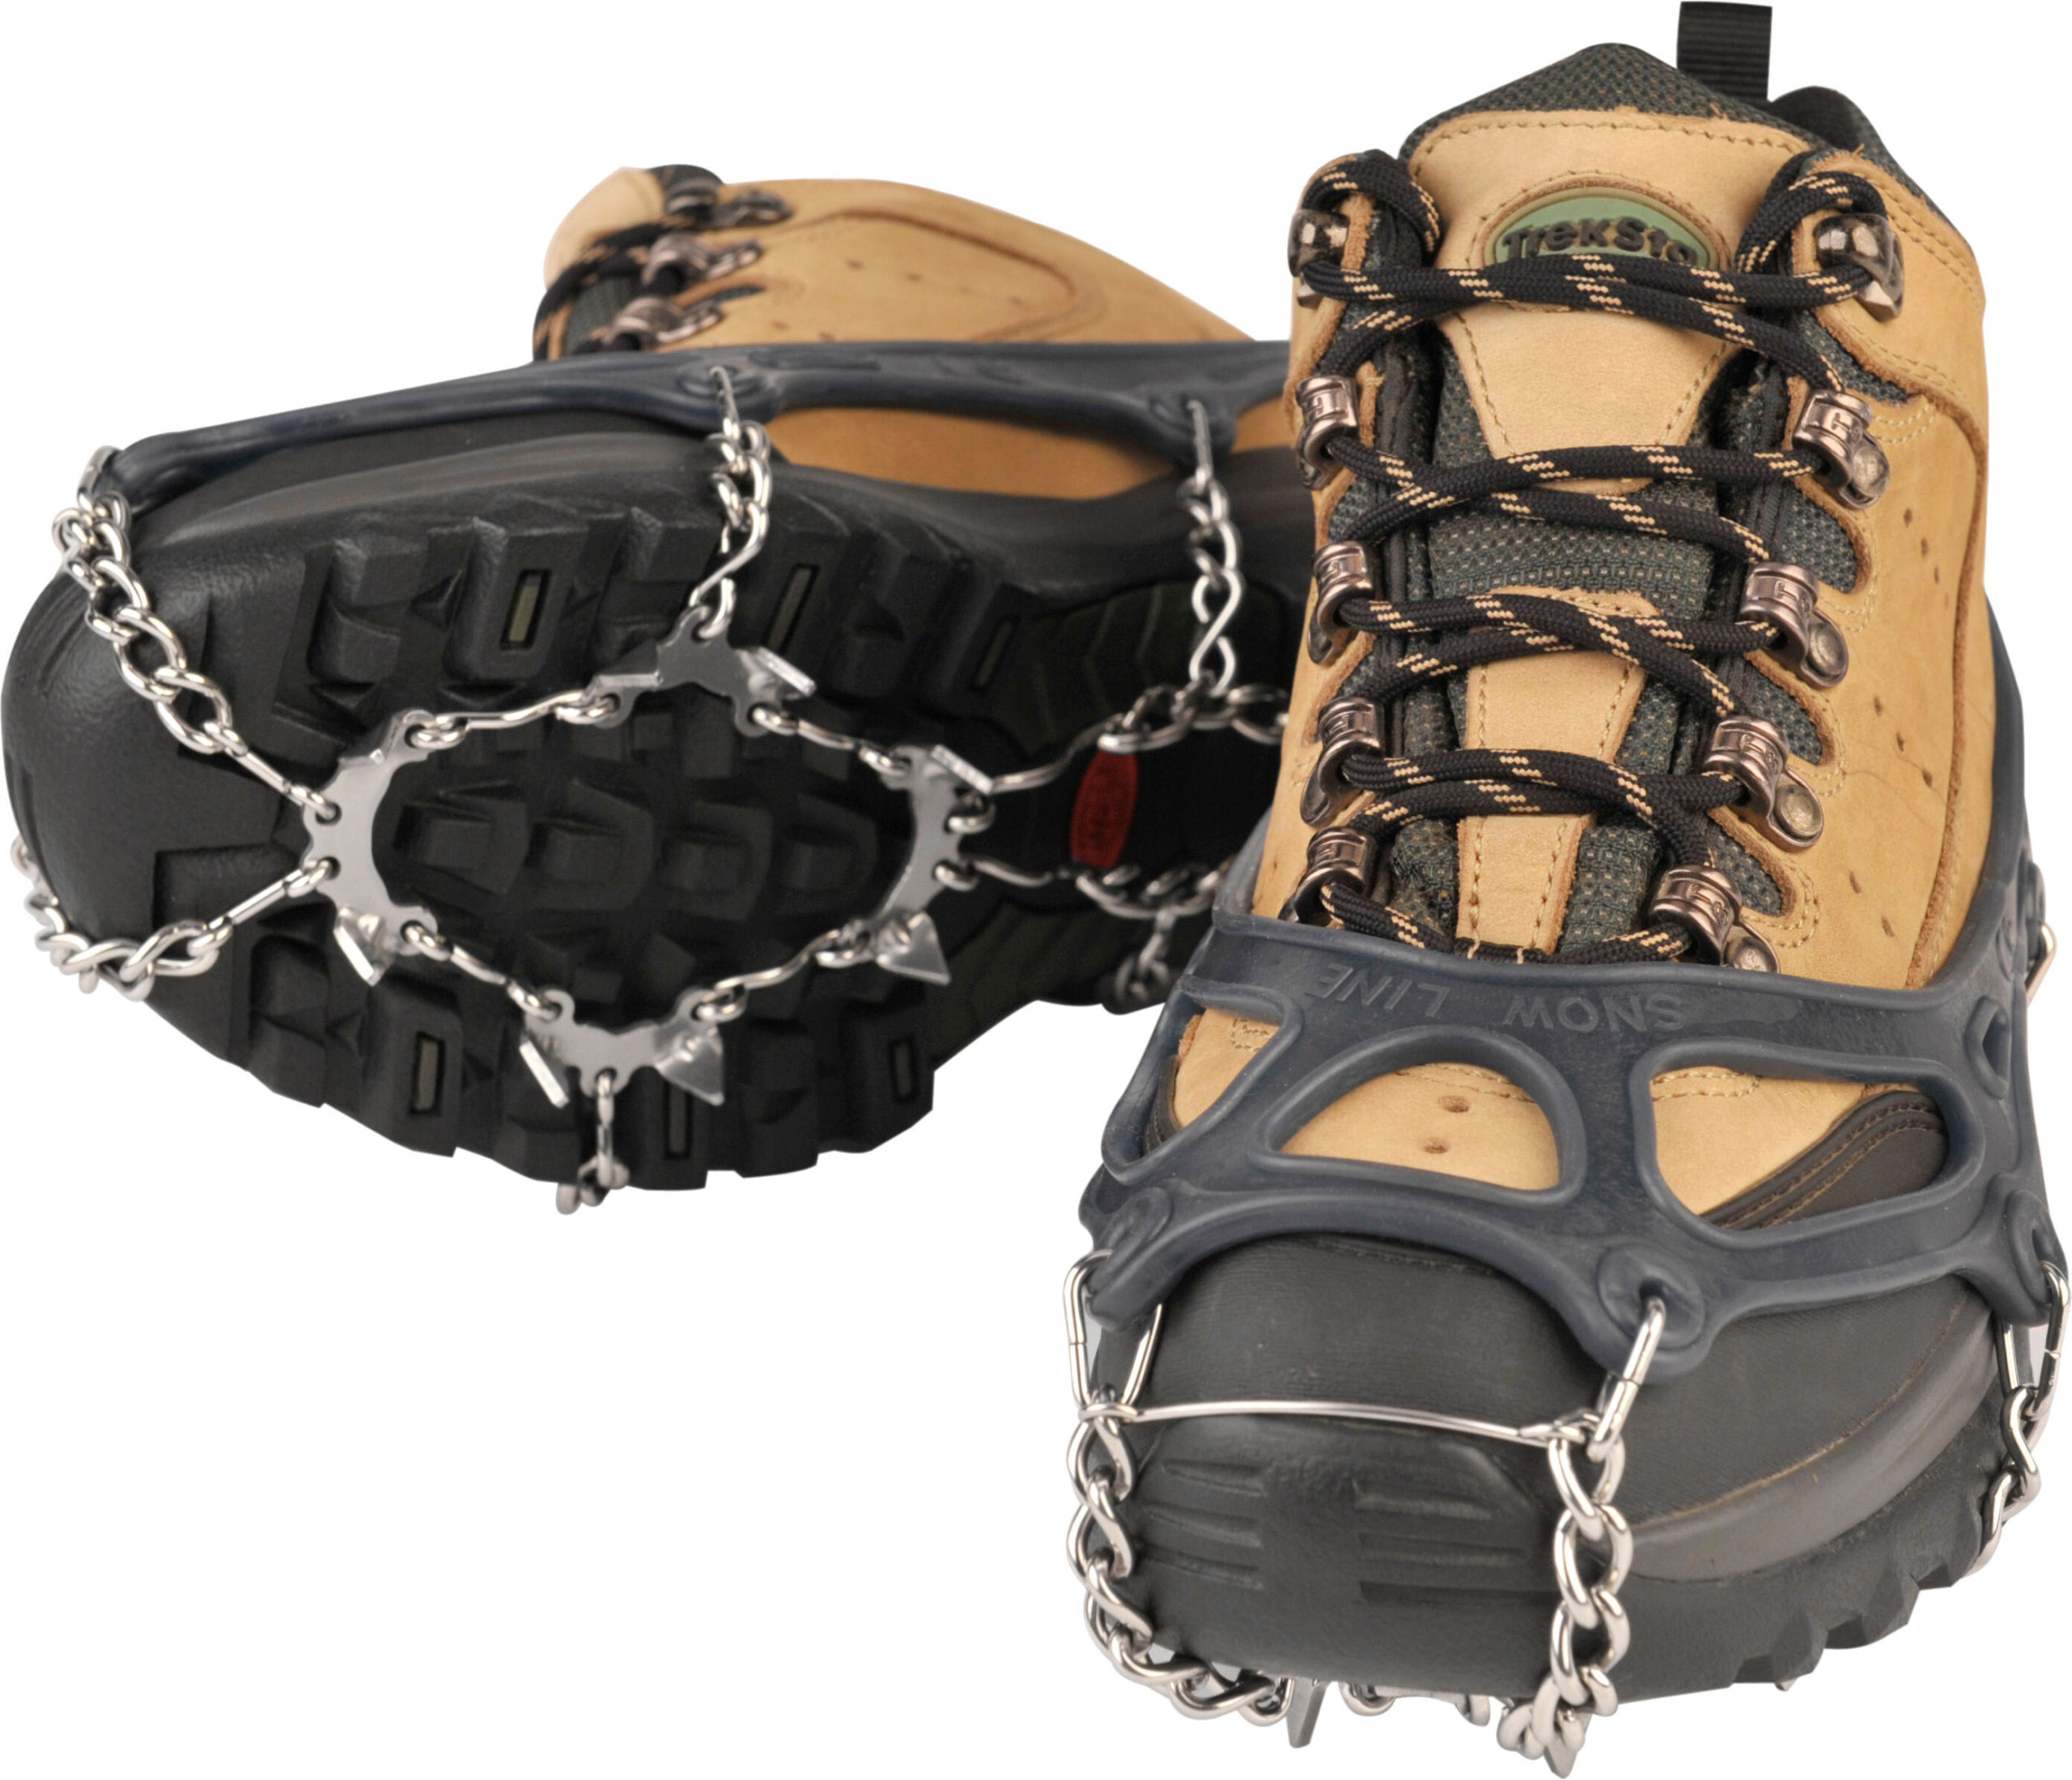 snow chains for boots Chainsen Pro Snowline 